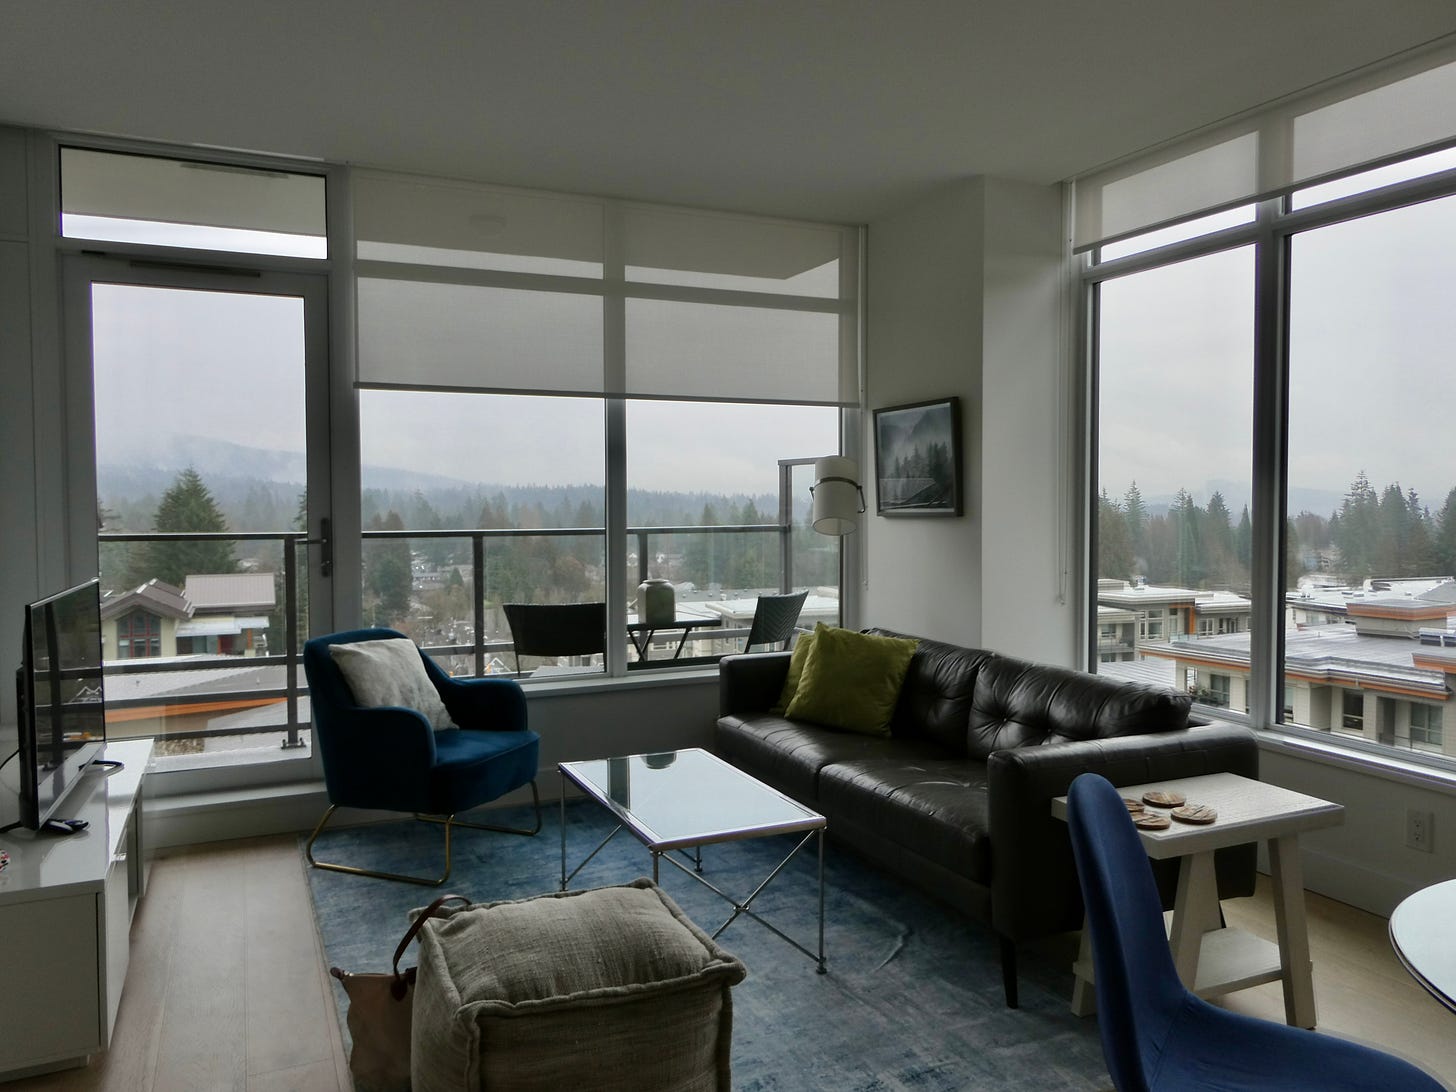 living room with windows overlooking fir trees, shorter buildings and mist